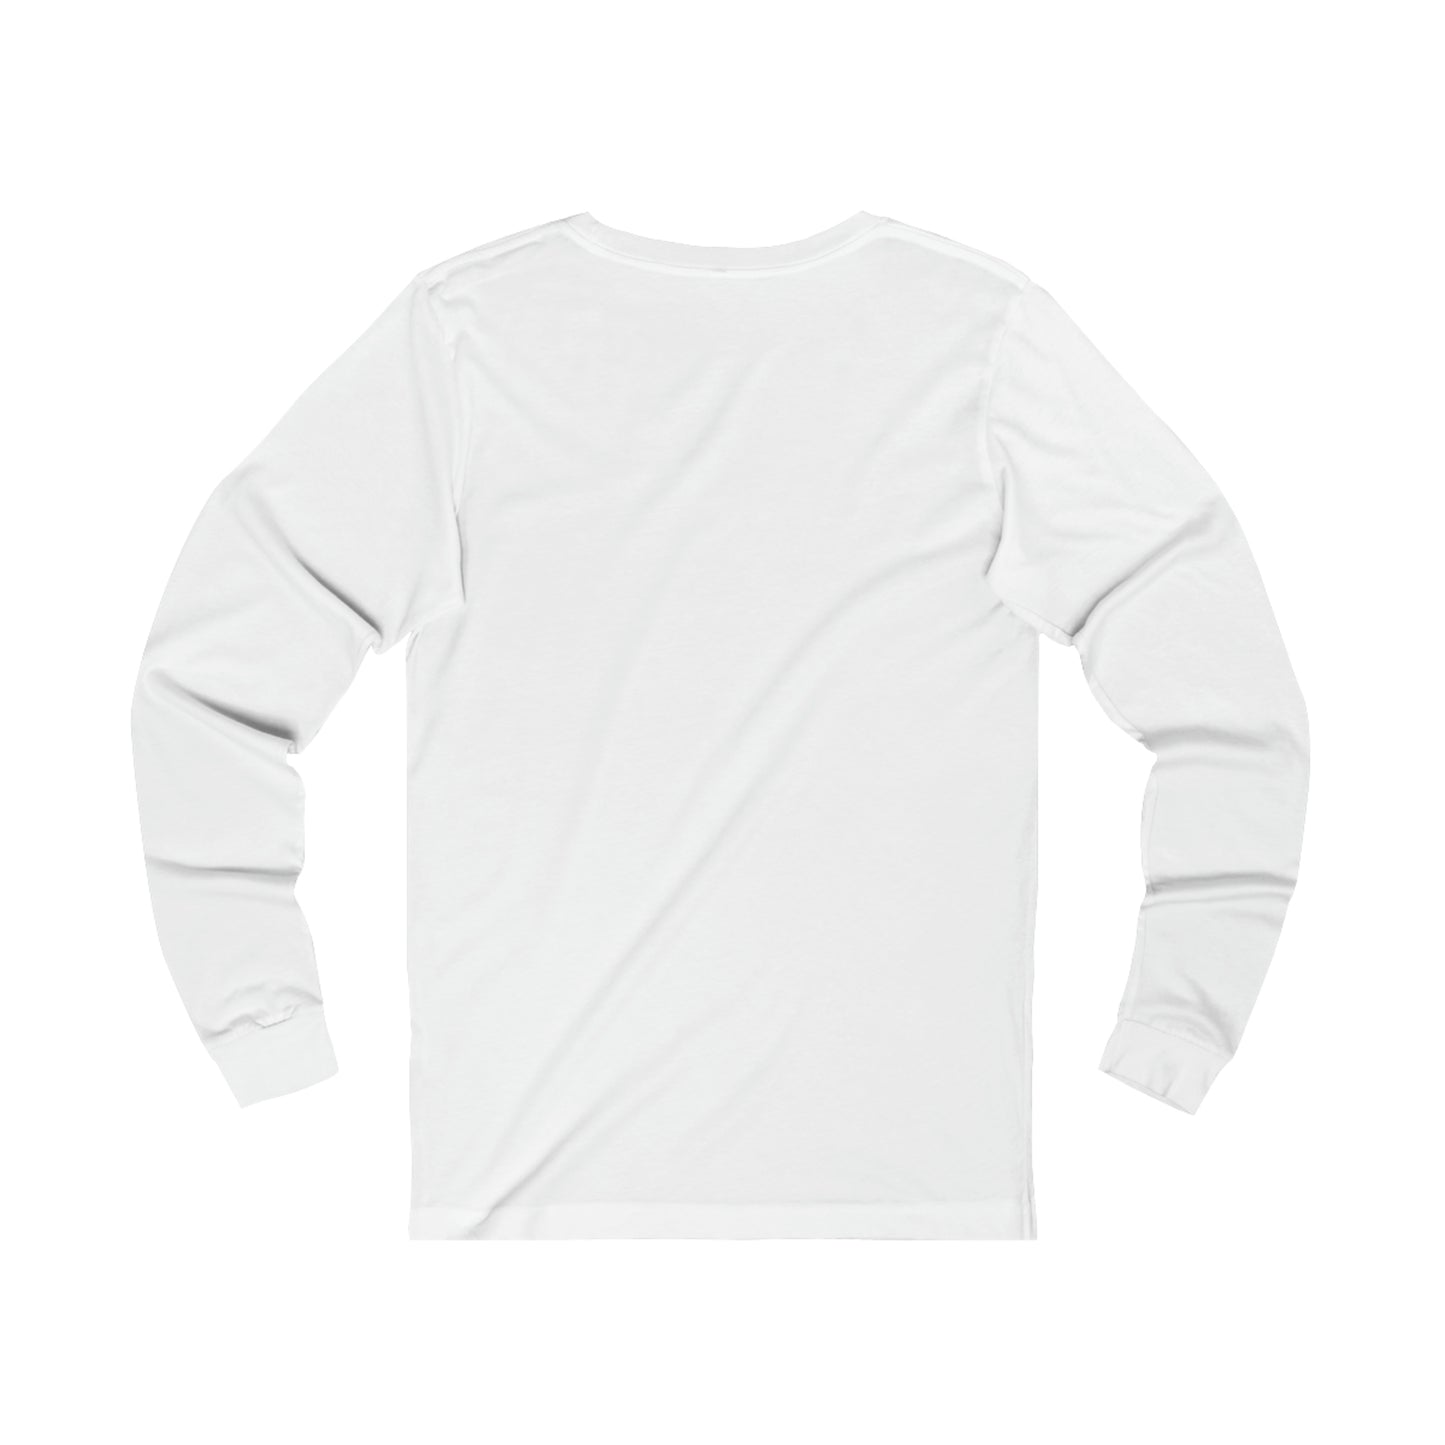 Ethical Equestrian Long Sleeve Tee